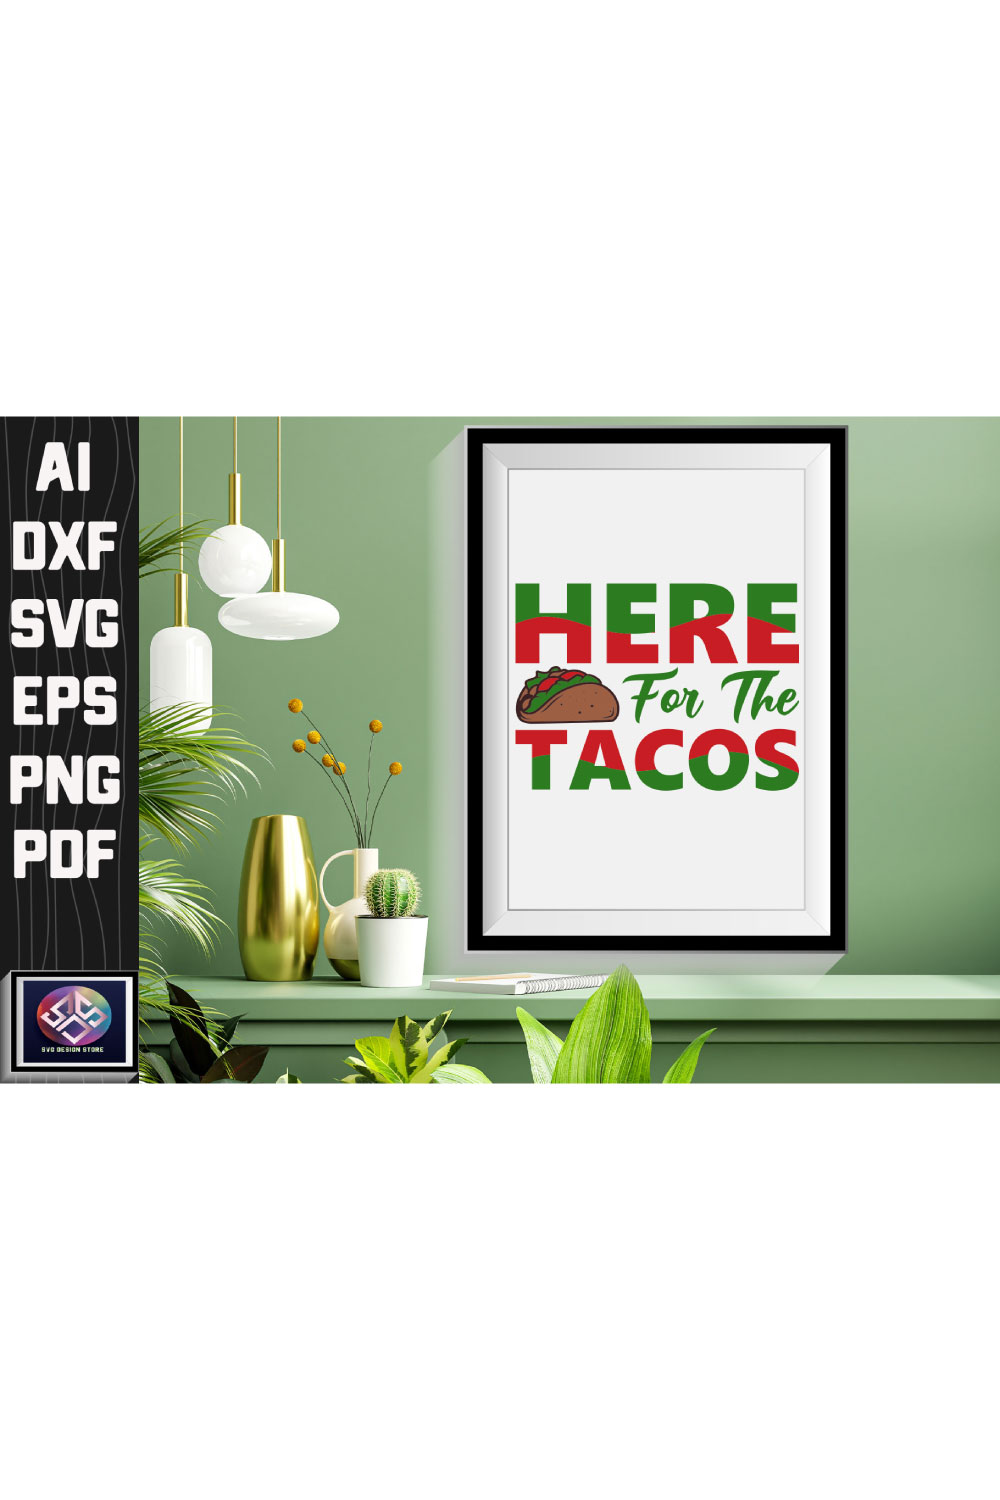 There is a picture of a picture of a taco.